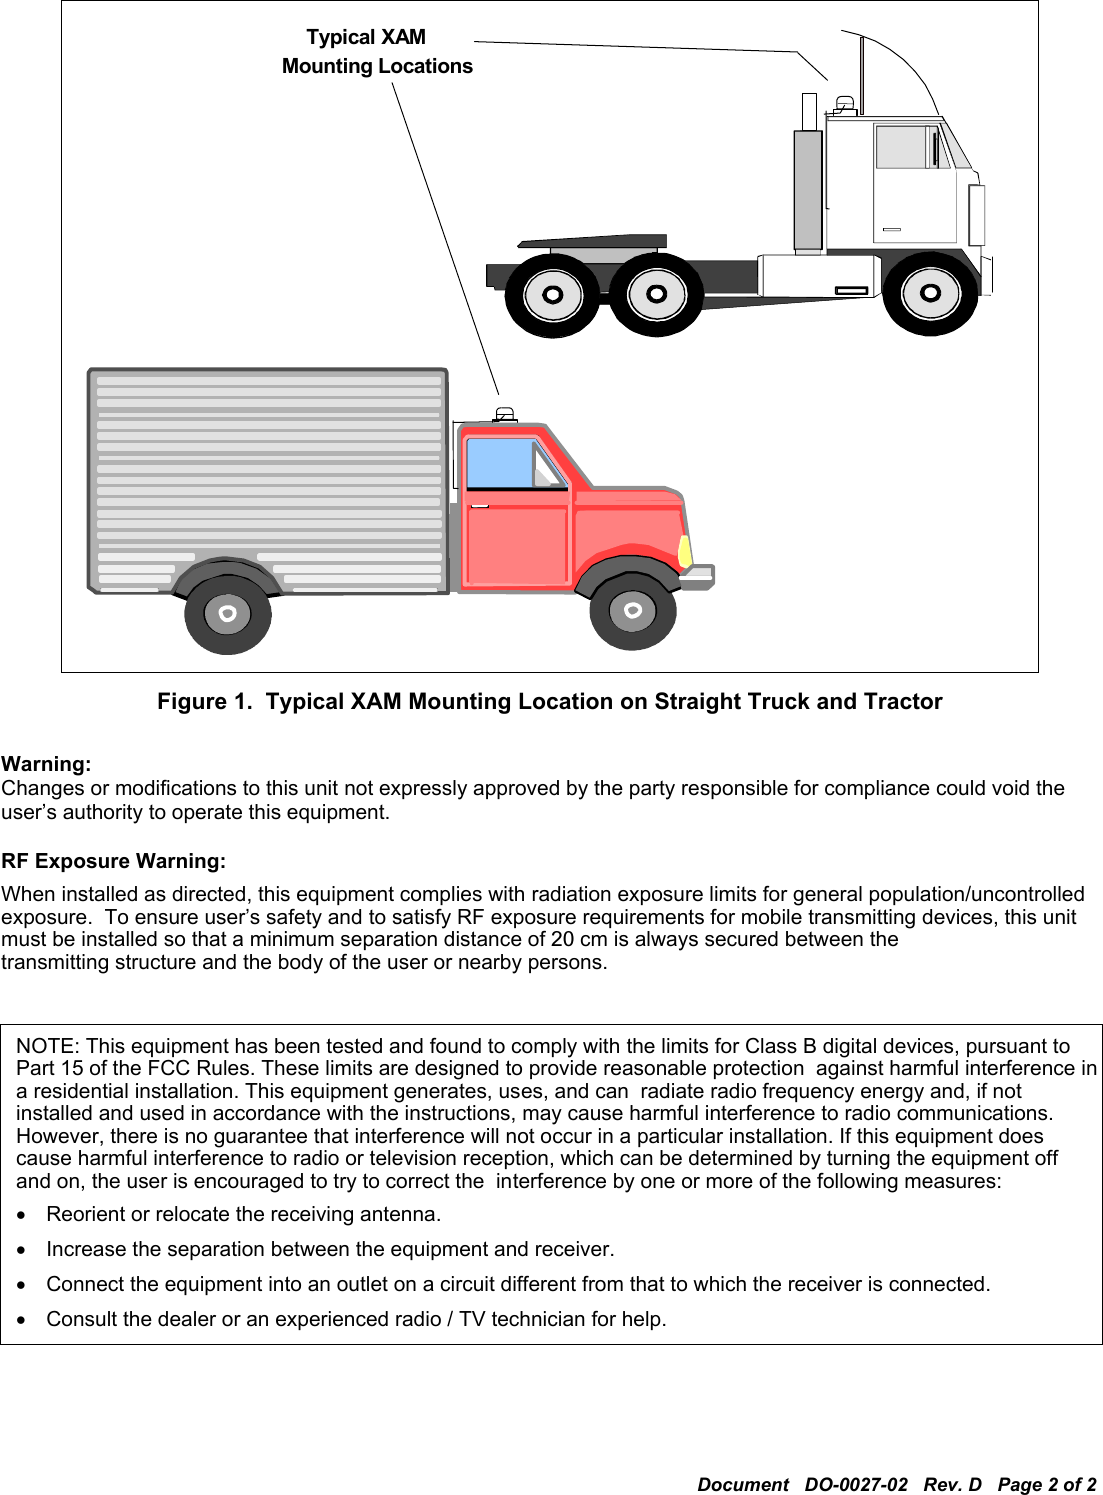 Document   DO-0027-02   Rev. D   Page 2 of 2    Mounting Locations Typical XAM   Figure 1.  Typical XAM Mounting Location on Straight Truck and Tractor  Warning: Changes or modifications to this unit not expressly approved by the party responsible for compliance could void the user’s authority to operate this equipment.  RF Exposure Warning: When installed as directed, this equipment complies with radiation exposure limits for general population/uncontrolled exposure.  To ensure user’s safety and to satisfy RF exposure requirements for mobile transmitting devices, this unit must be installed so that a minimum separation distance of 20 cm is always secured between the transmitting structure and the body of the user or nearby persons.  NOTE: This equipment has been tested and found to comply with the limits for Class B digital devices, pursuant to Part 15 of the FCC Rules. These limits are designed to provide reasonable protection  against harmful interference in a residential installation. This equipment generates, uses, and can  radiate radio frequency energy and, if not installed and used in accordance with the instructions, may cause harmful interference to radio communications. However, there is no guarantee that interference will not occur in a particular installation. If this equipment does cause harmful interference to radio or television reception, which can be determined by turning the equipment off and on, the user is encouraged to try to correct the  interference by one or more of the following measures: •  Reorient or relocate the receiving antenna. •  Increase the separation between the equipment and receiver. •  Connect the equipment into an outlet on a circuit different from that to which the receiver is connected. •  Consult the dealer or an experienced radio / TV technician for help. 